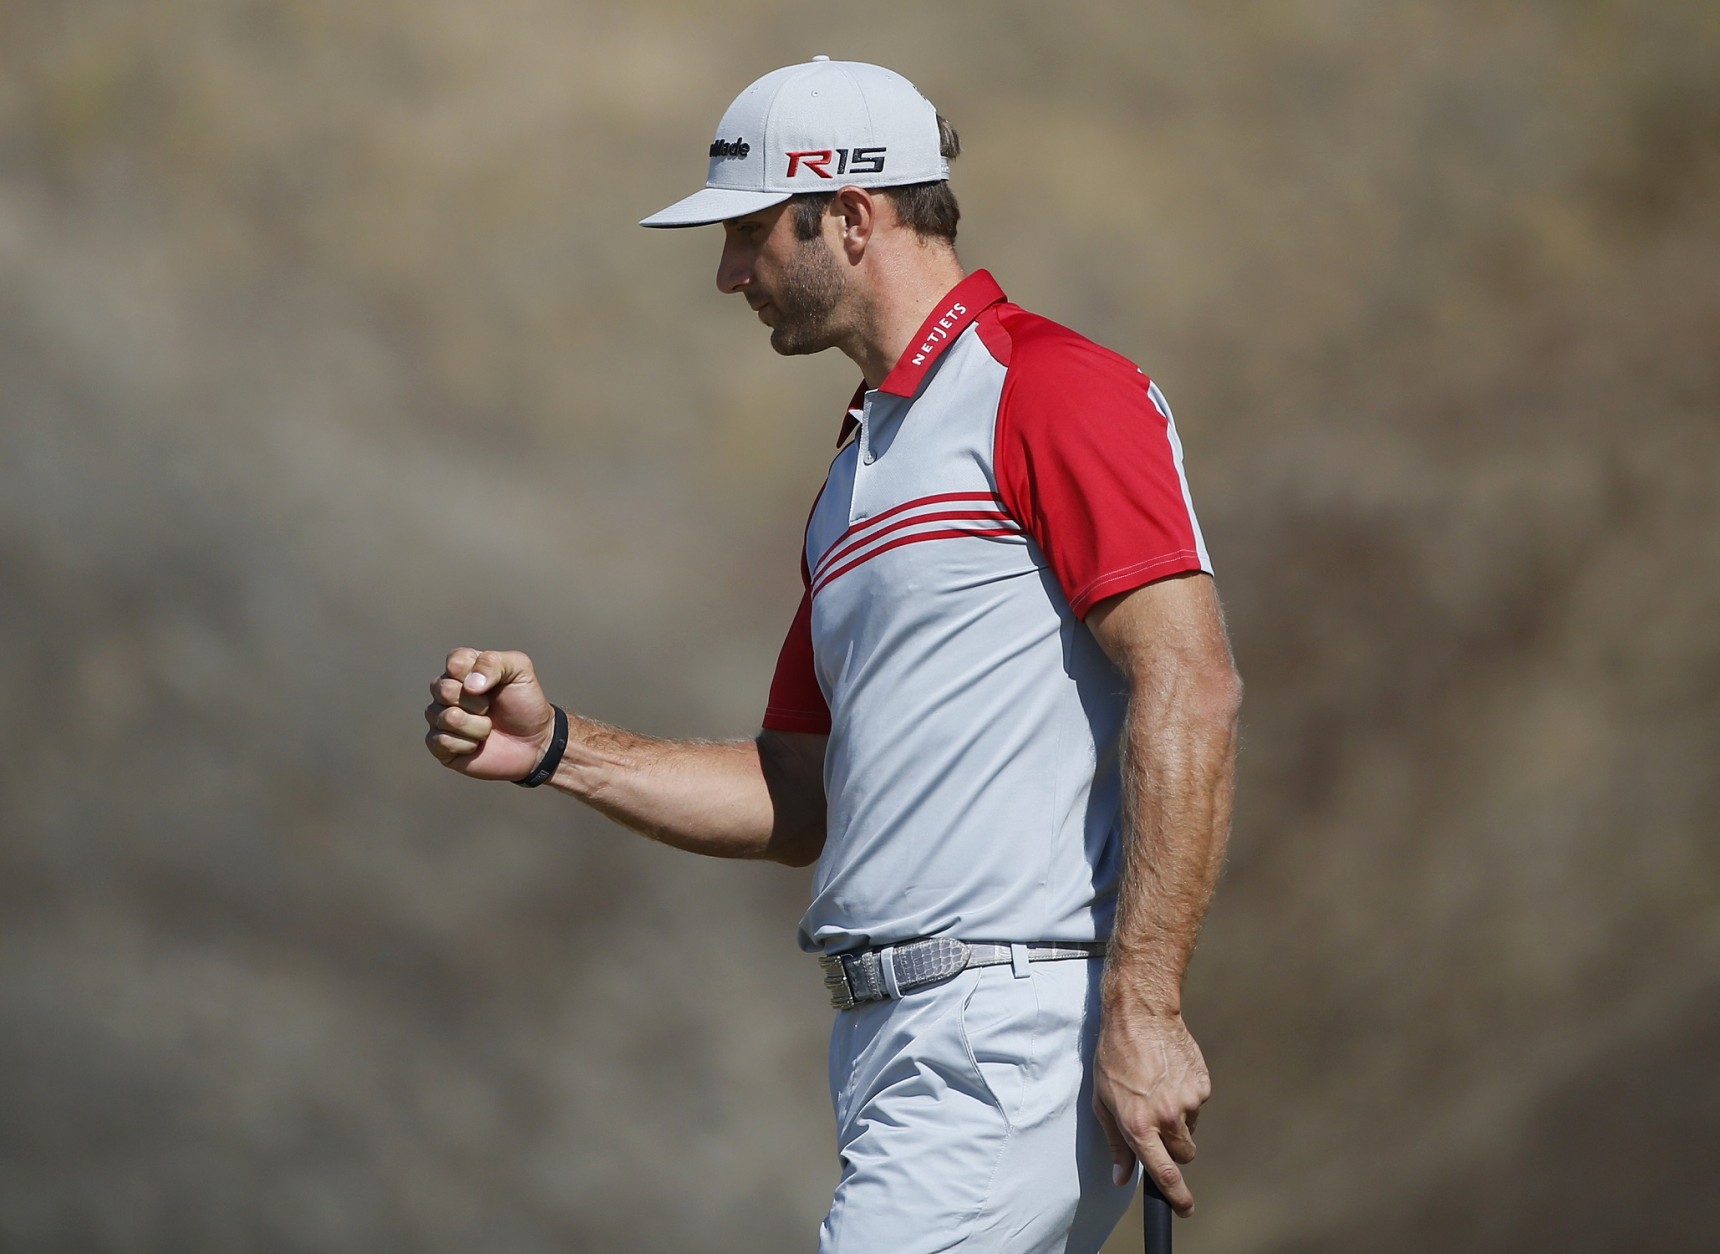 Dustin Johnson reacts after making a birdie on the ninth hole during the third round of the U.S. Open golf tournament at Chambers Bay on Saturday, June 20, 2015 in University Place, Wash. (AP Photo/Lenny Ignelzi)